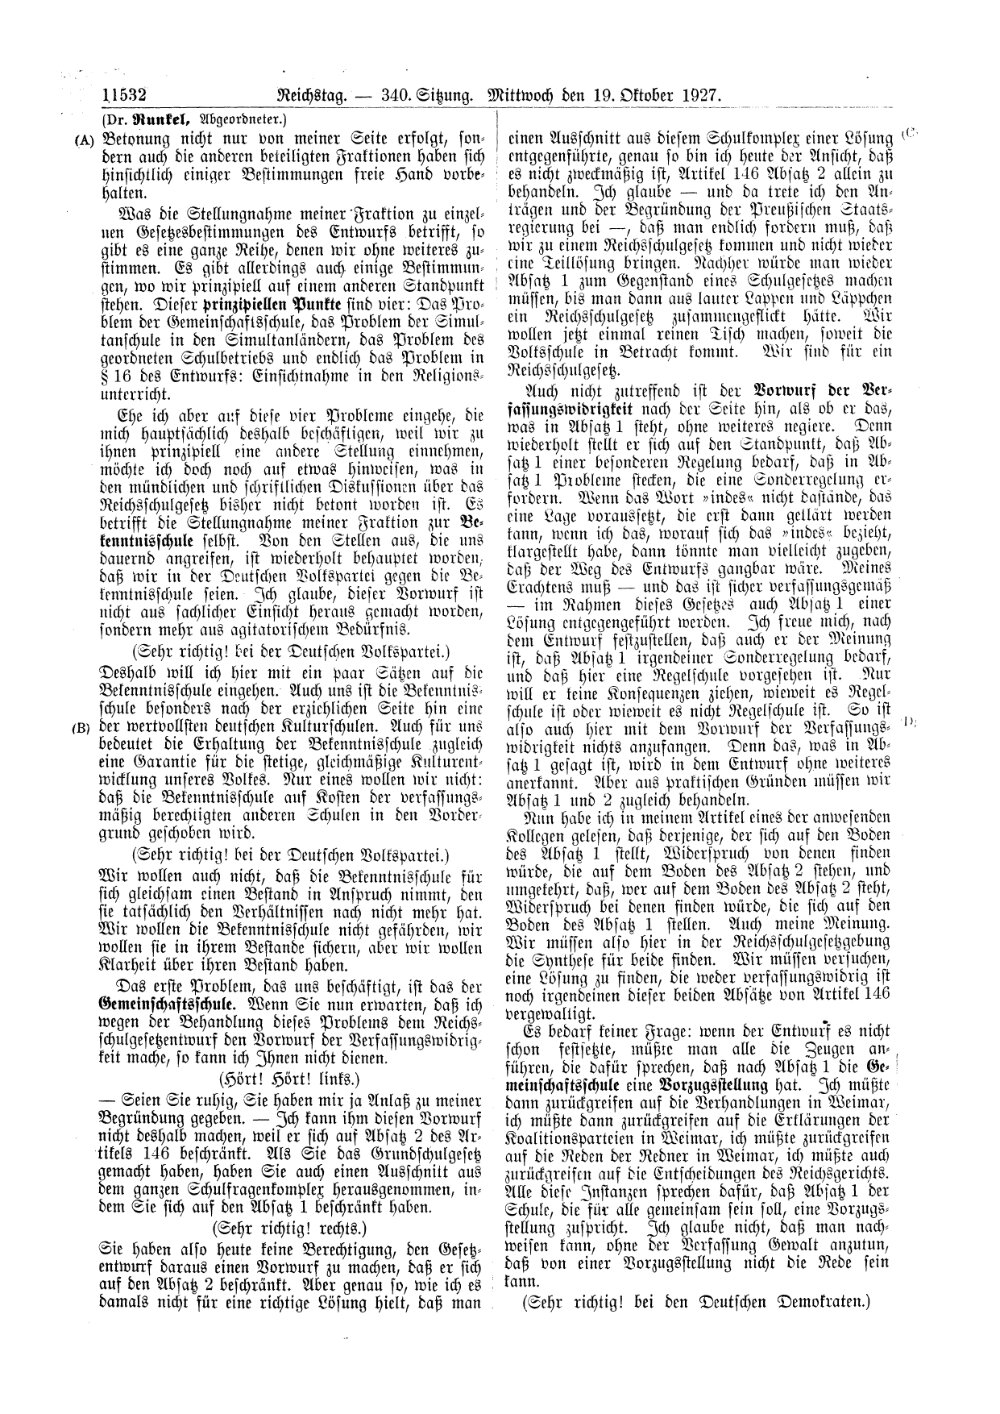 Scan of page 11532